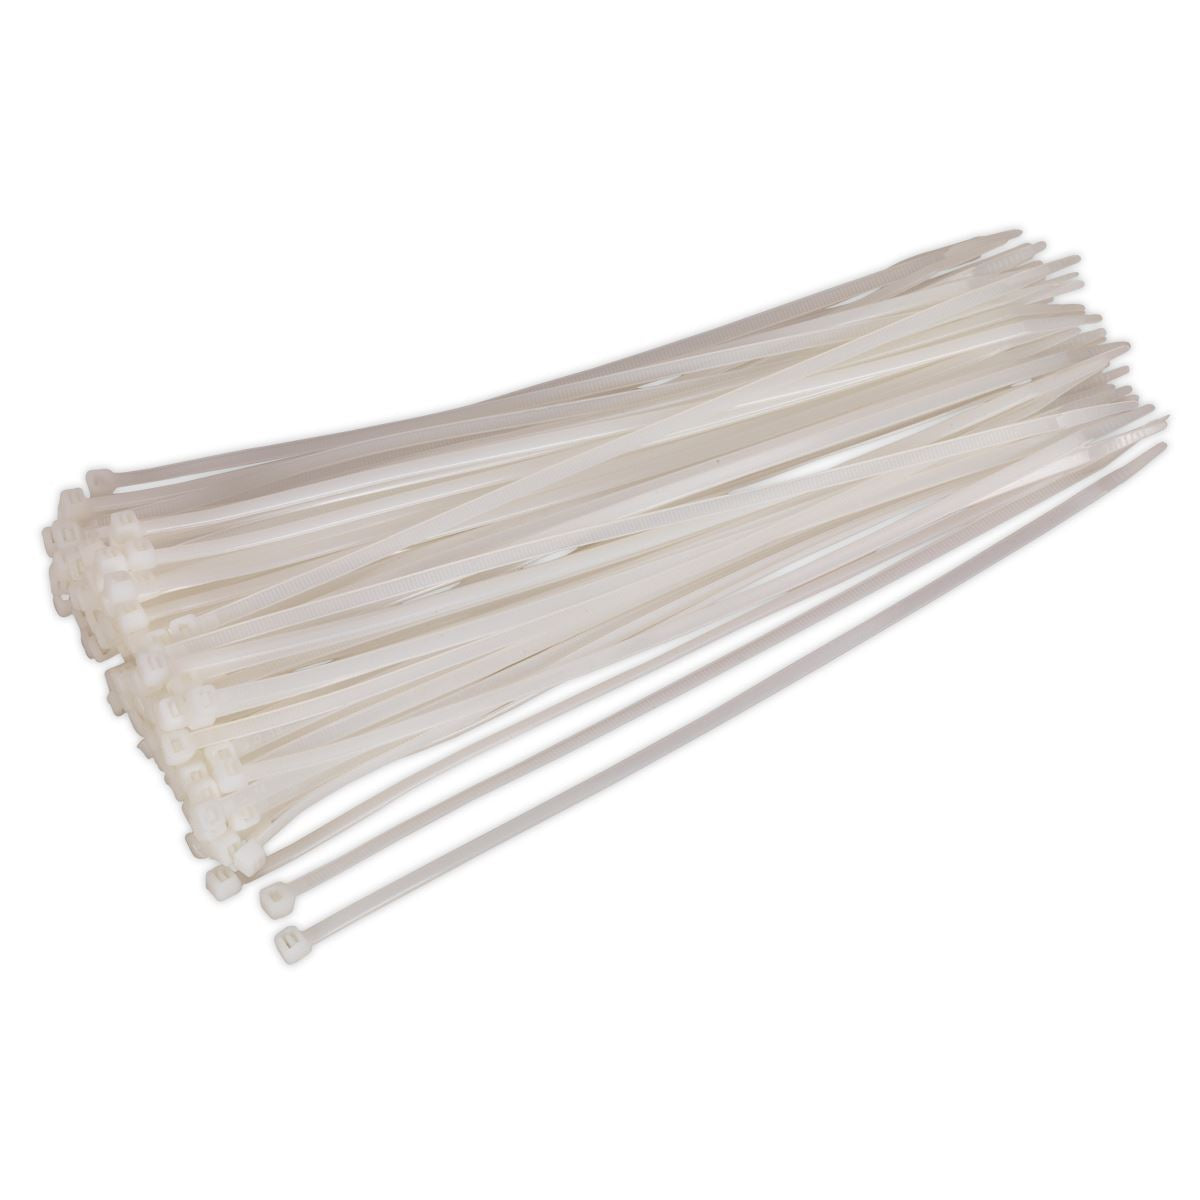 Sealey Cable Tie 300 x 4.8mm White Pack of 100